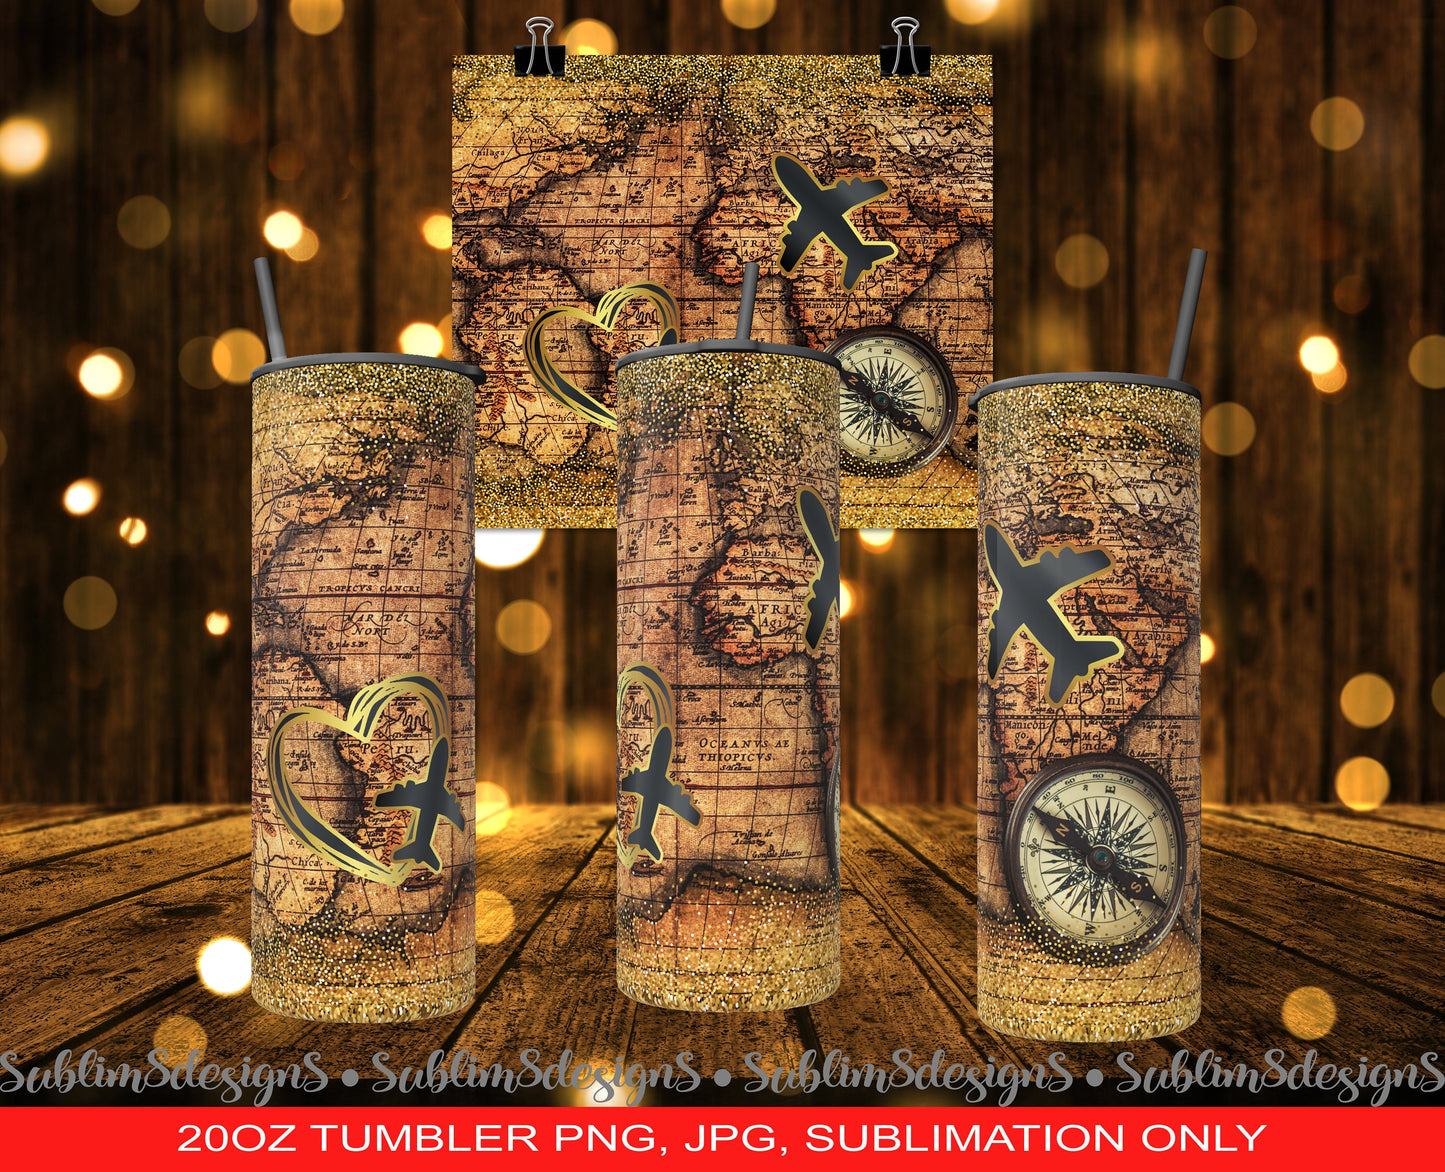 Vintage World Map with Gold Glitter and Airplane Compass - A Journey Through Time and Space Sublimation Tumbler Design Wrap PNG and JPEG